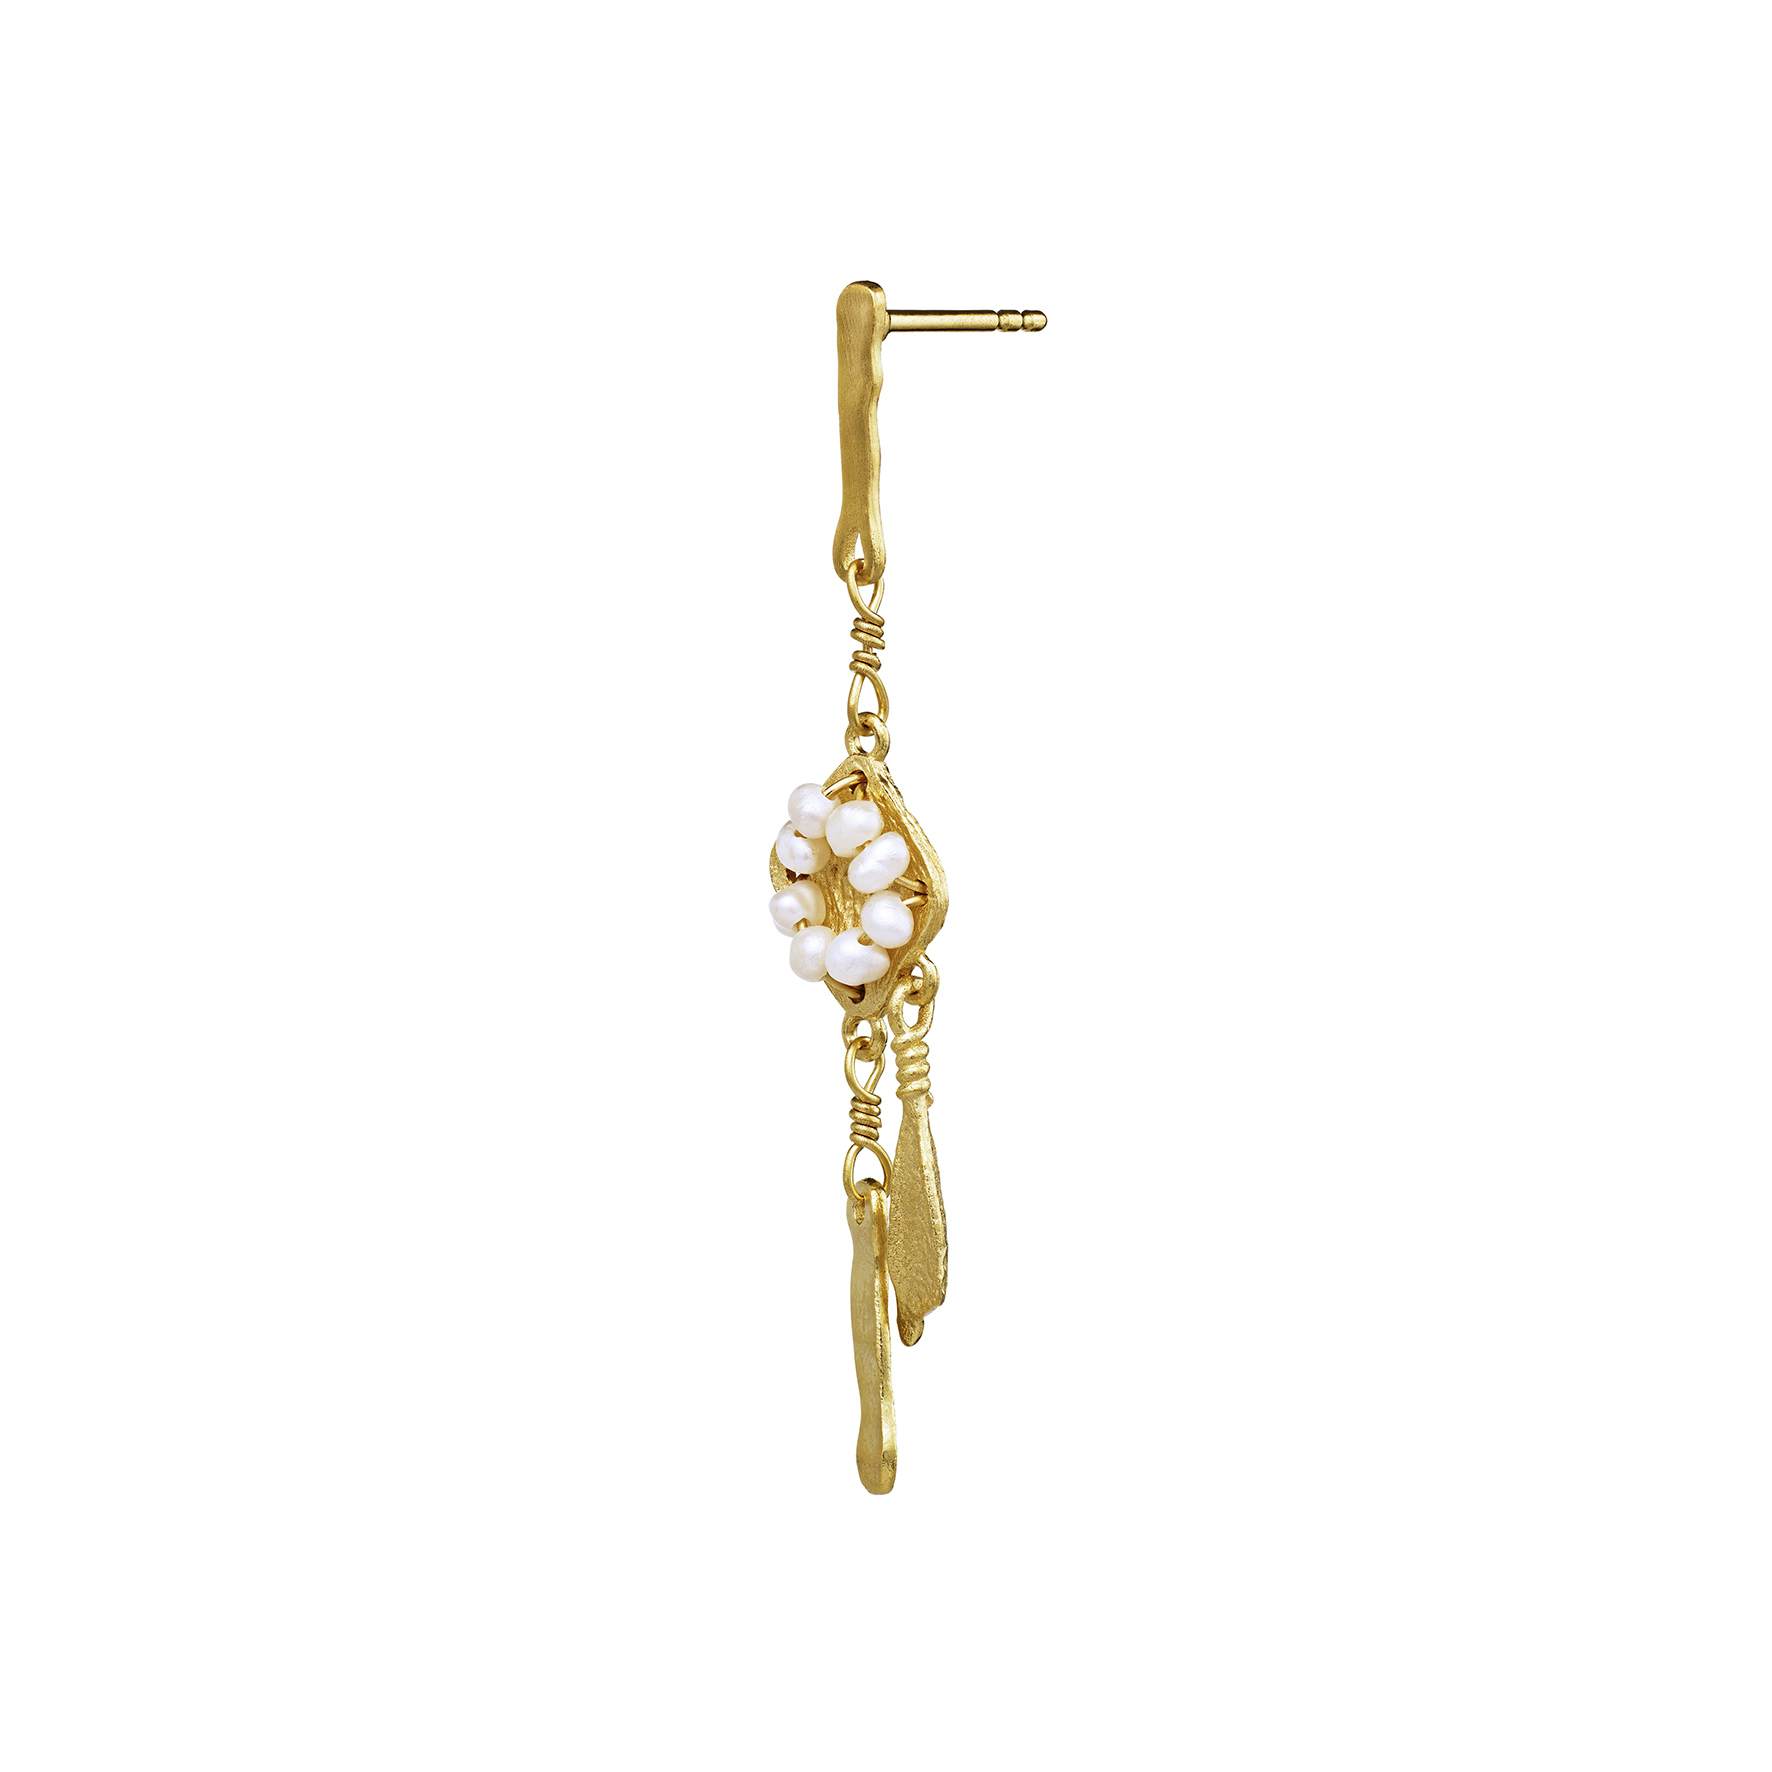 Ansa Earring from Maanesten in Goldplated-Silver Sterling 925|Freshwater Pearl